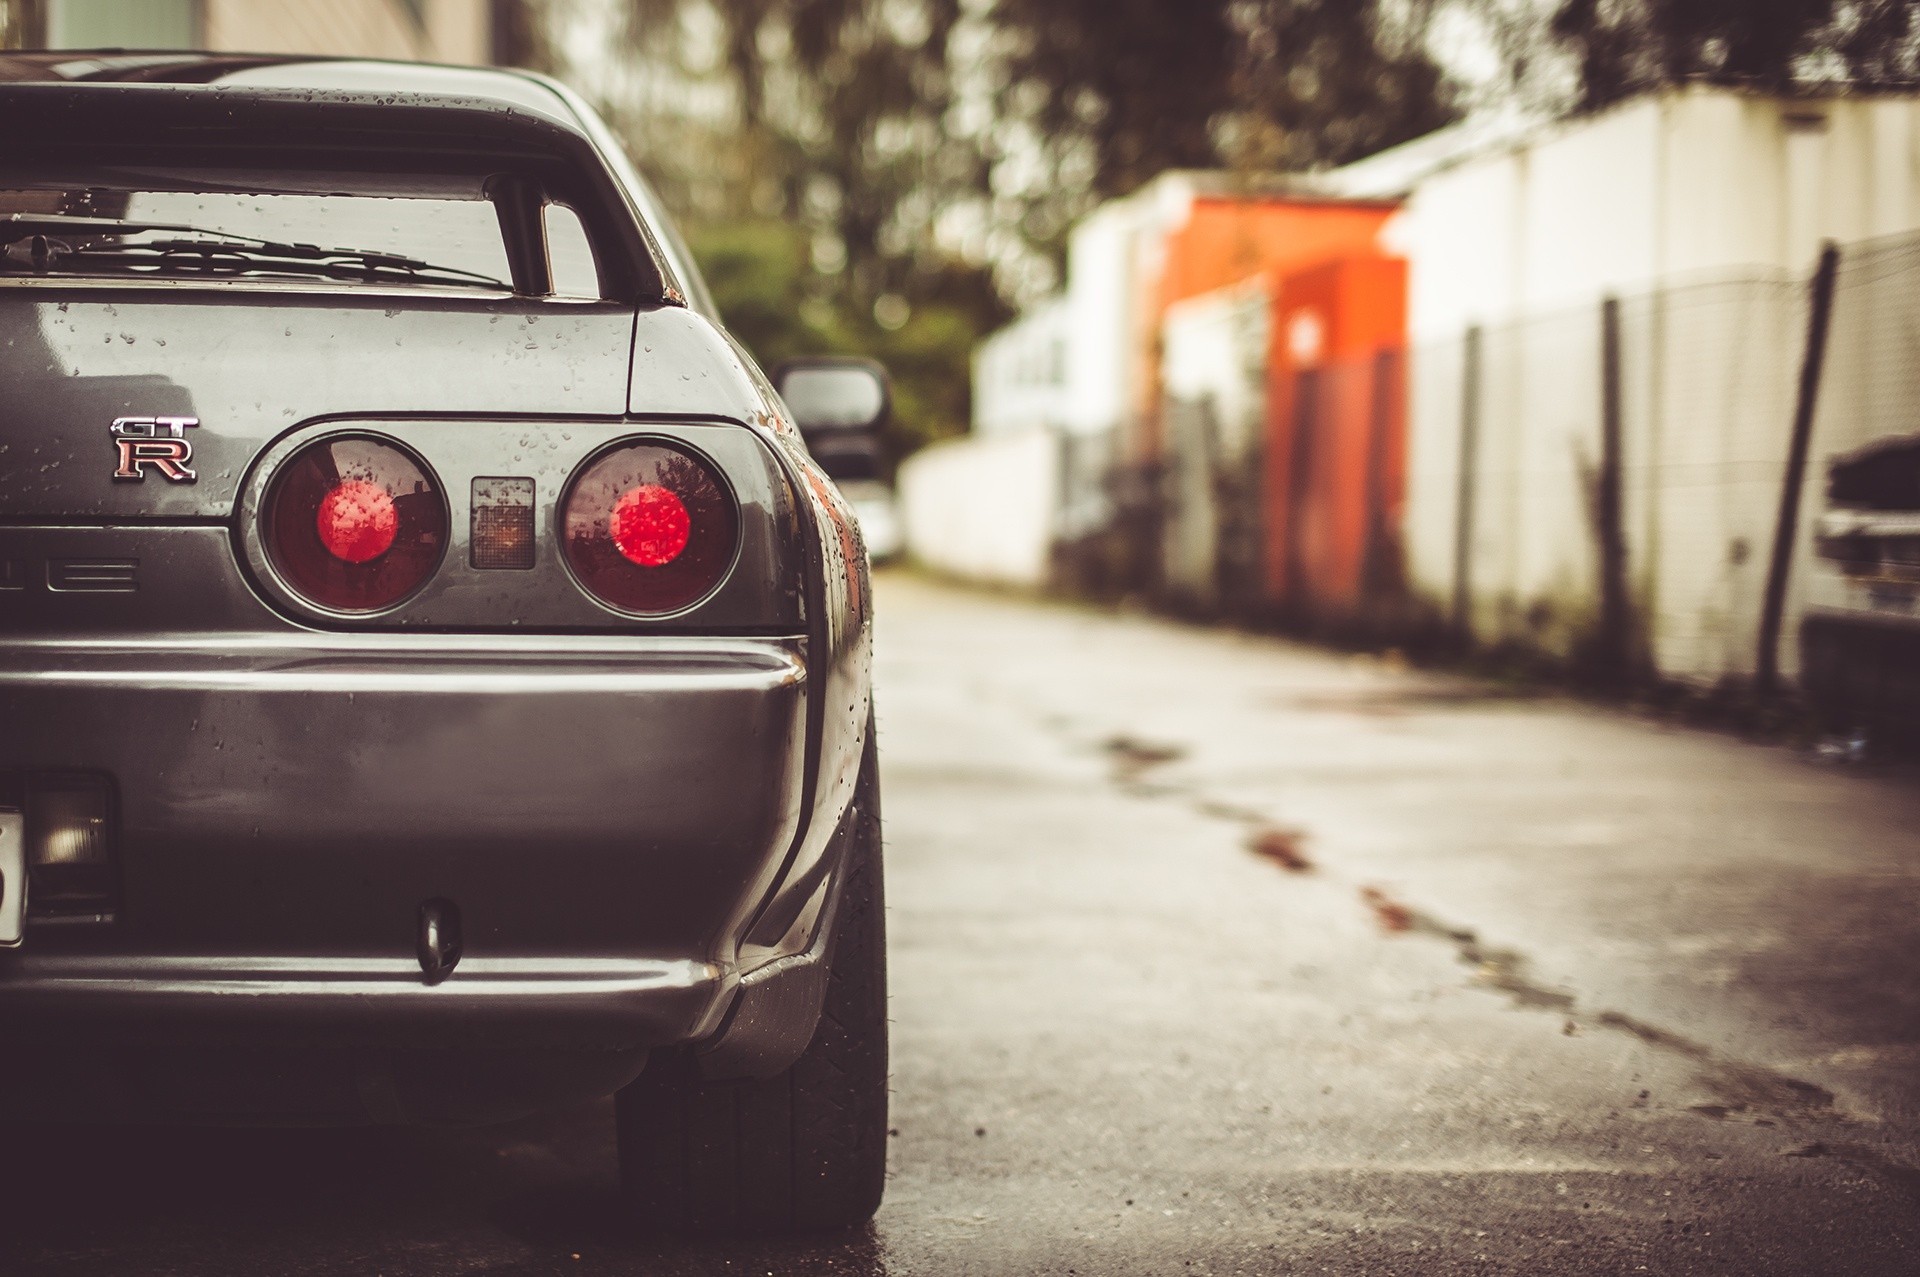 1920x1277 High Resolution Pictures Collection of Nissan Skyline Wallpaper